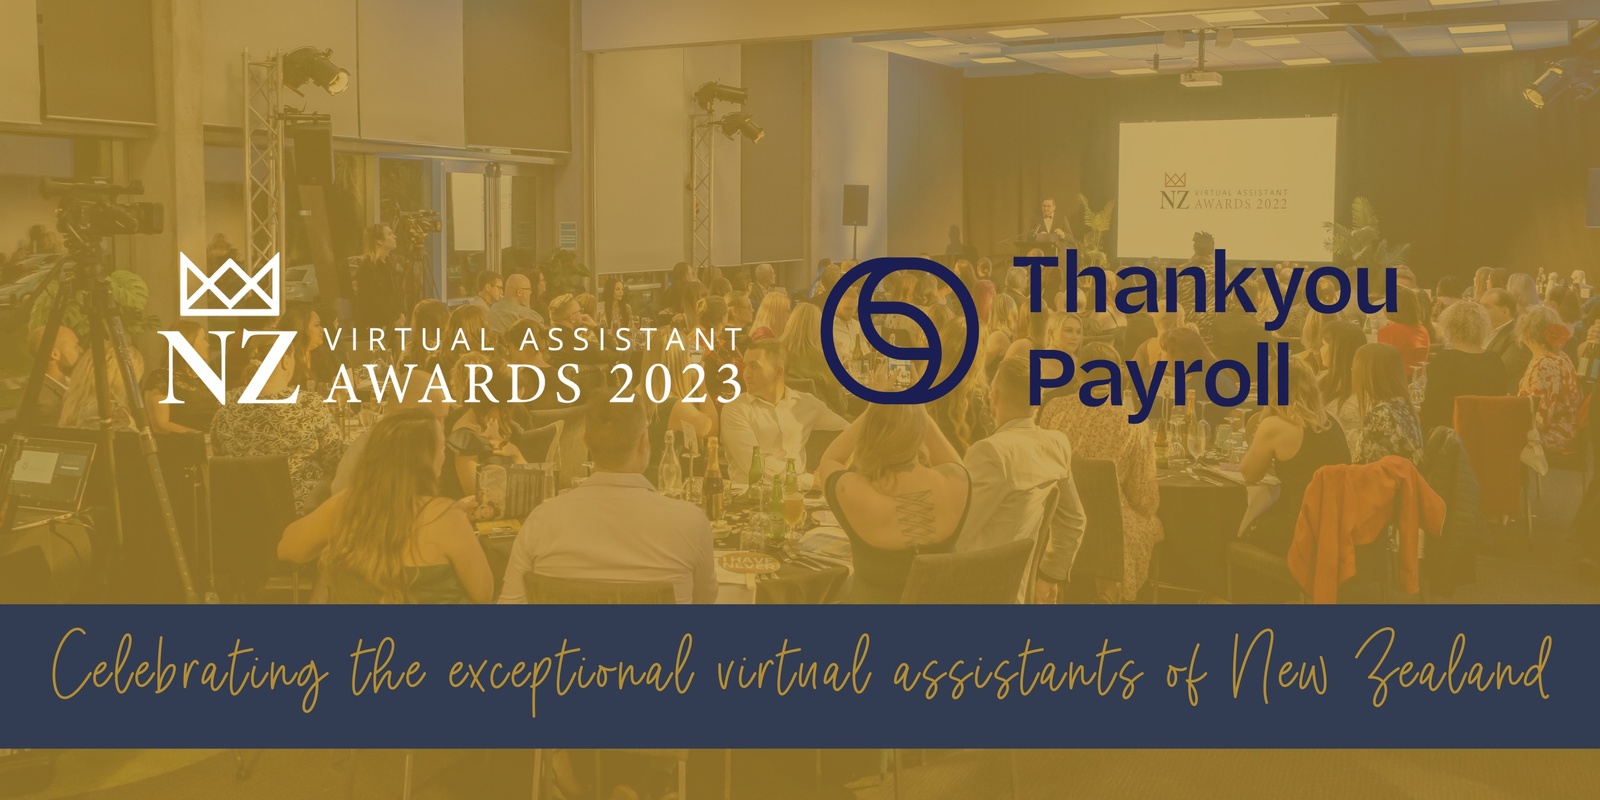 Banner image for The Thankyou Payroll New Zealand Virtual Assistant Awards 2023